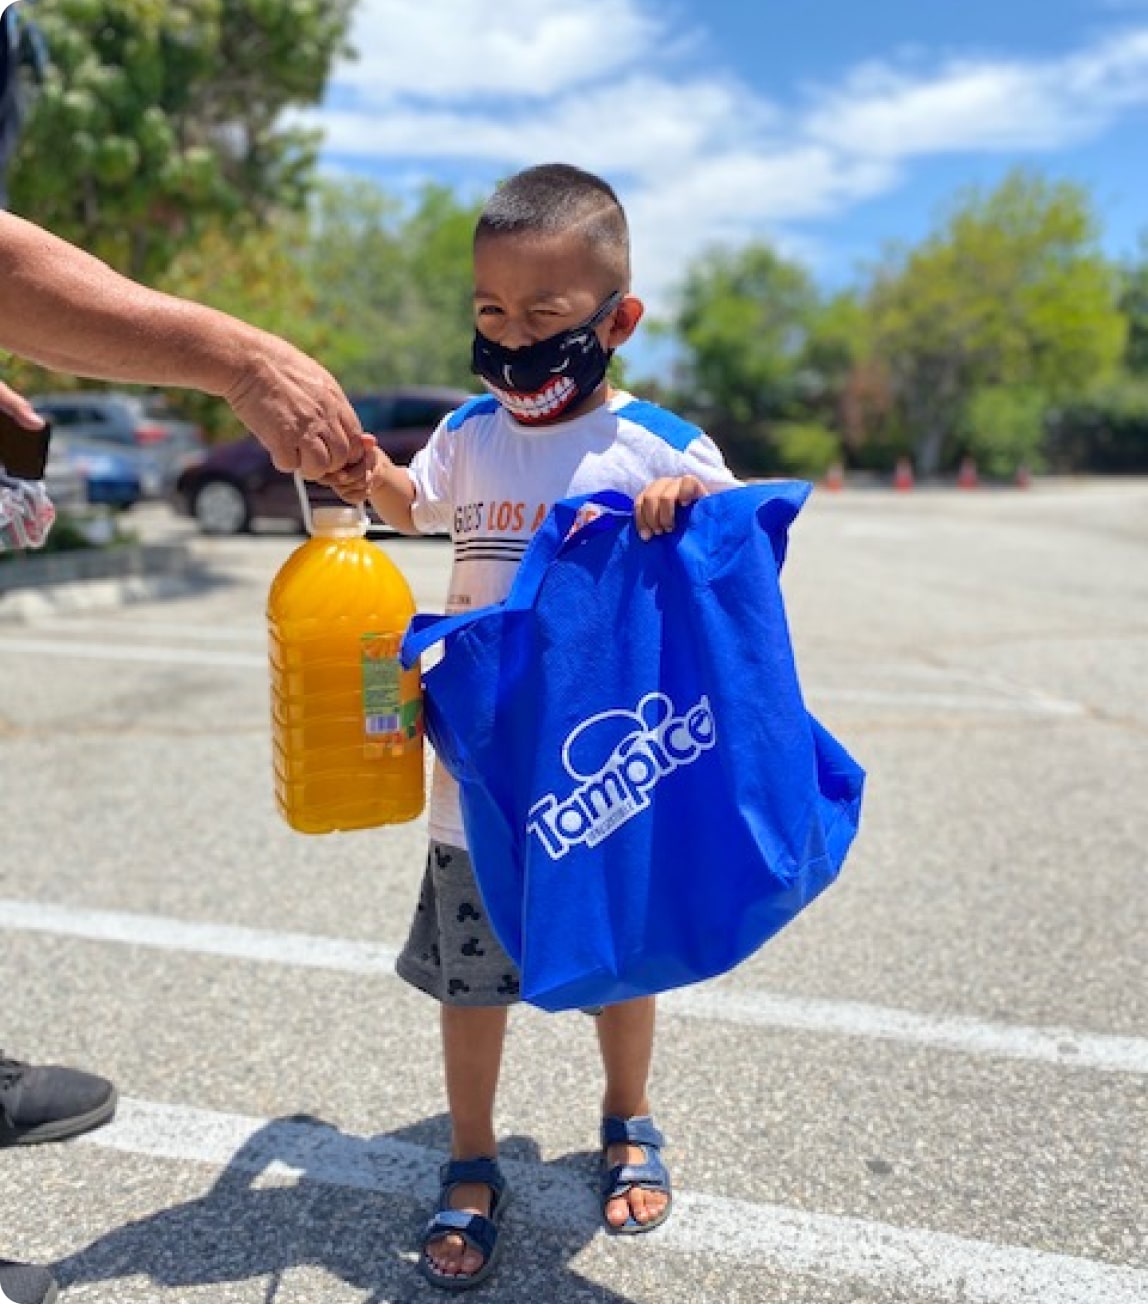 Little boy holding Tampico punch and shopping bag